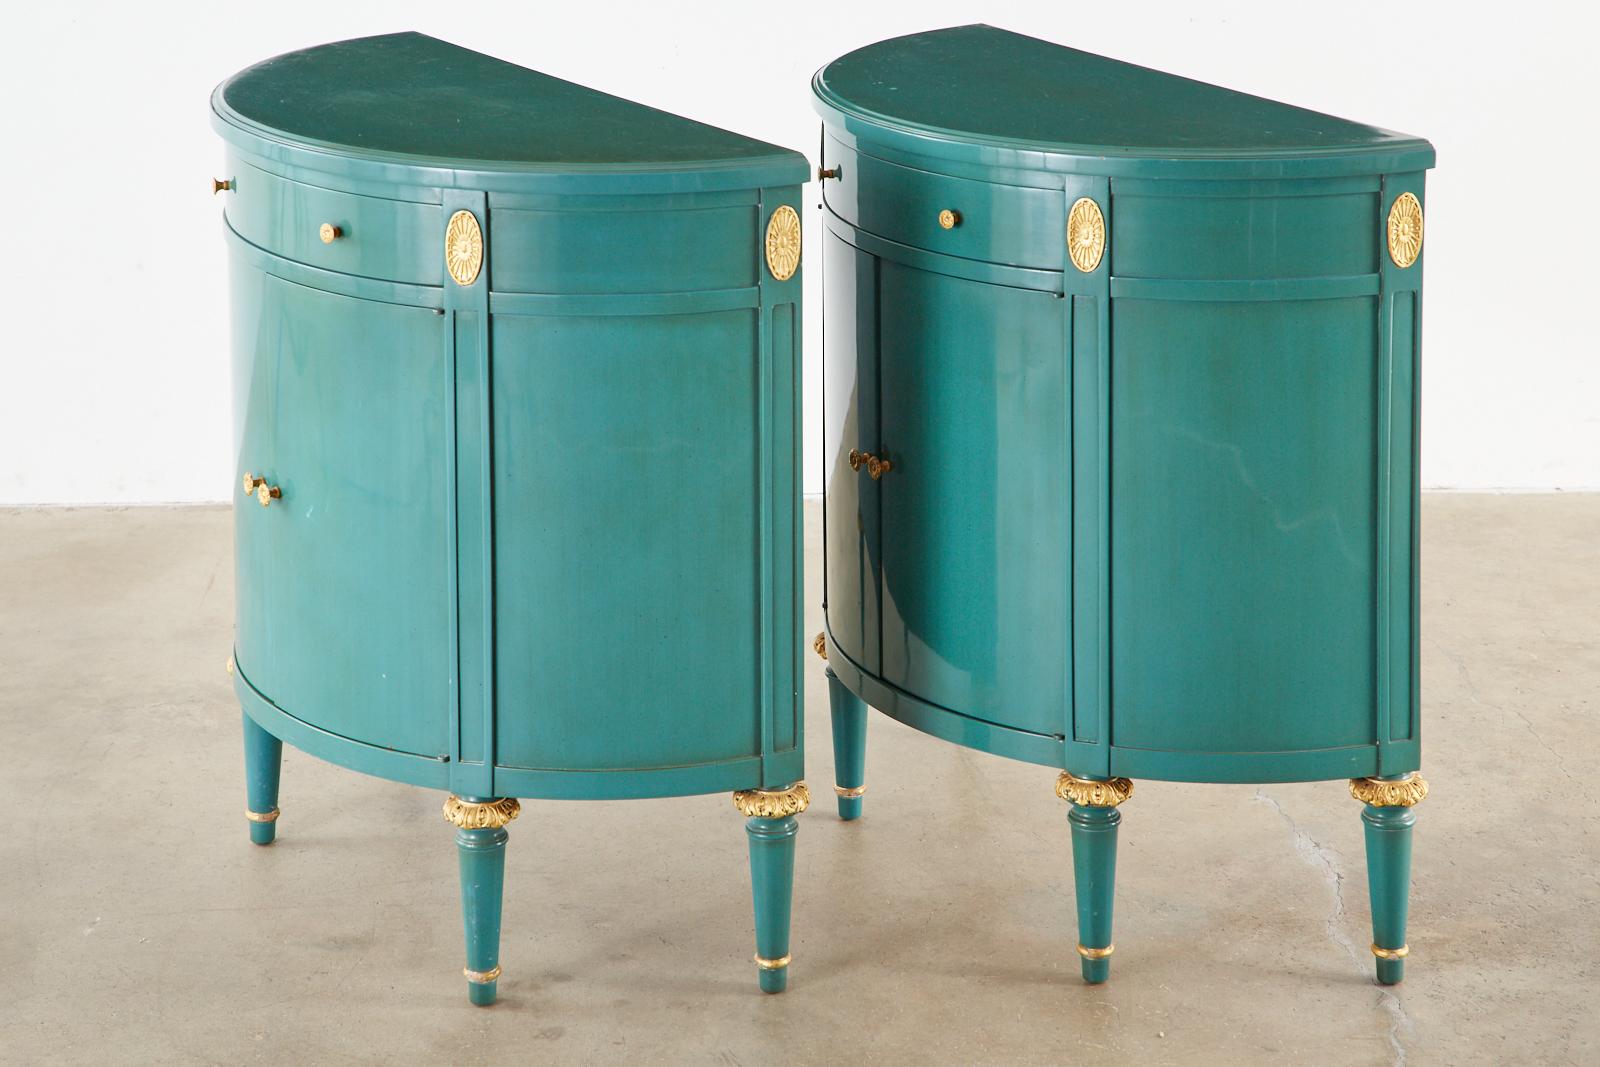 Bespoke pair of lacquered cabinets having a demilune form. Featuring a turquoise blue-green finish with gilt rosettes and acanthus on the legs. Each cabinet has a drawer on top of two doors opening to a large storage area. The pulls have gilt bronze